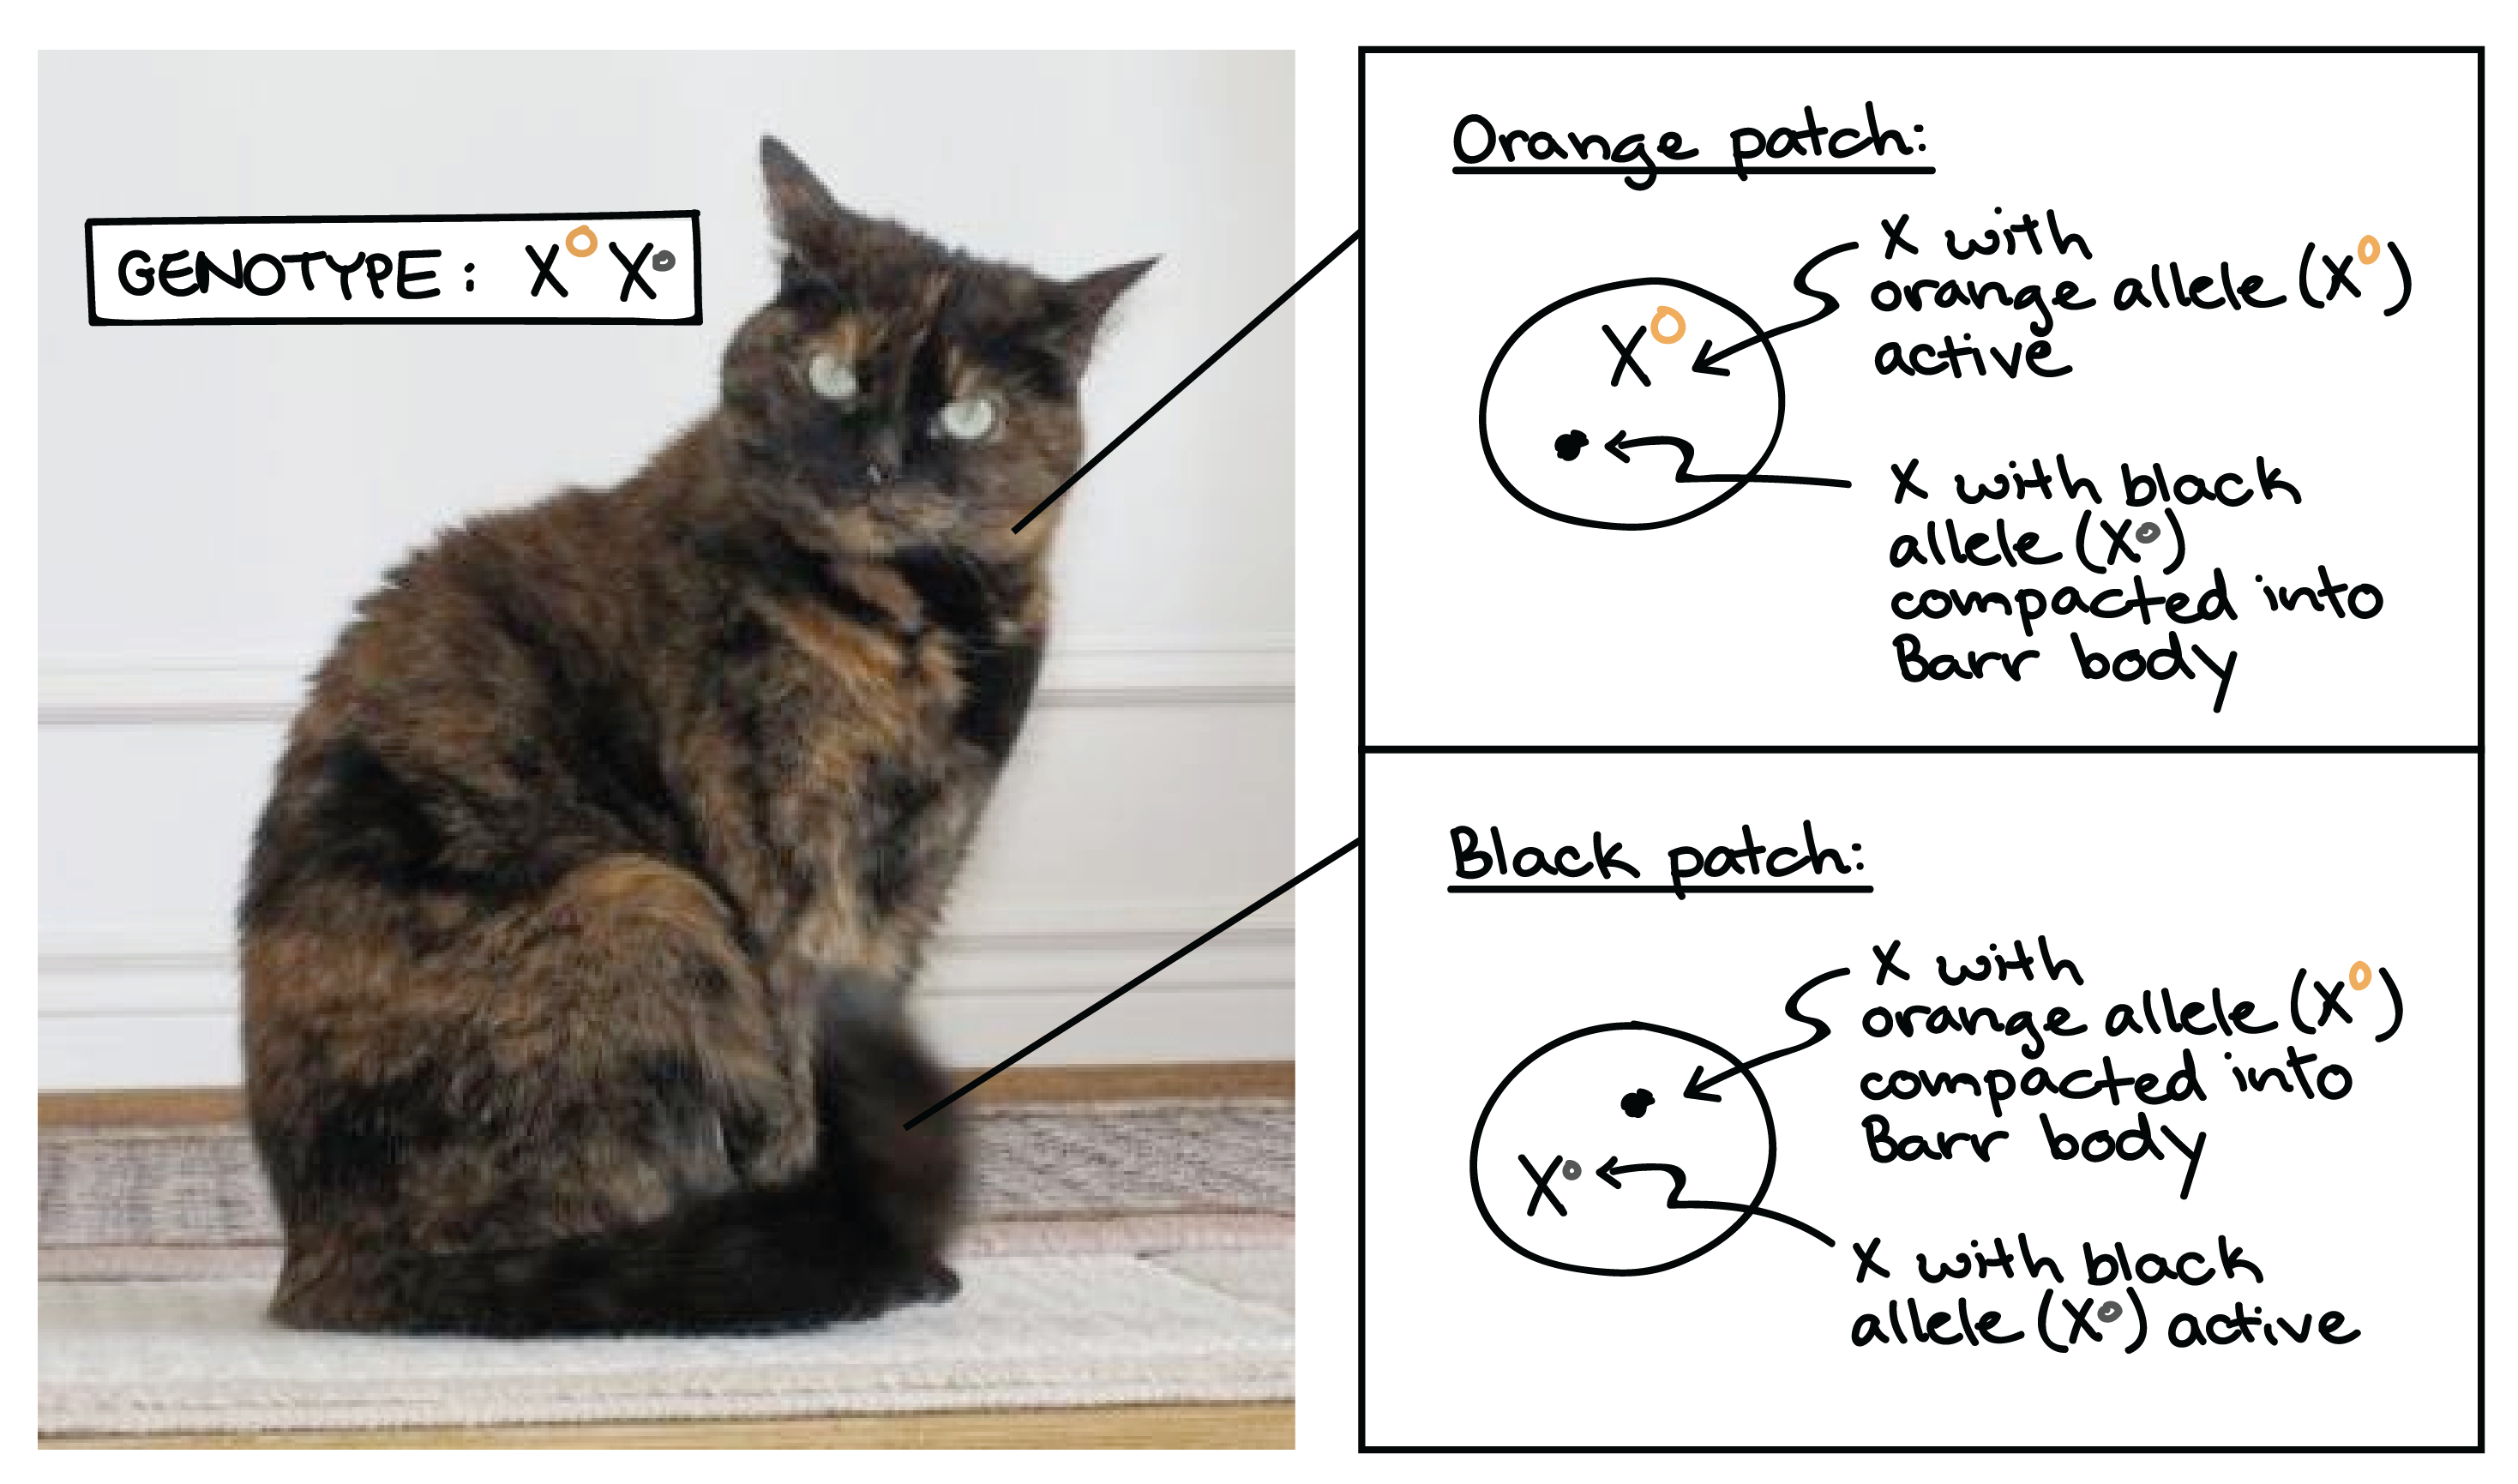 Image of a tortoiseshell cat, illustrating the X-inactivation processes responsible for the different patches of color on its coat. The cat has a mix of black and tan patches of fur, some small and some large. The cat's genotype is $\text X^O\text X^o$, where the large _O_ stands for orange and the small _o_ stands for black. * The orange patch is made up of cells in which the X  with the orange allele ($\text X^O$) is active, while the X with the black allele ($\text X^o$) is compacted into a Barr body.* The black patch is made up of cells in which the X  with the black allele ($\text X^o$) is active, while the X with the orange allele ($\text X^O$) is compacted into a Barr body.